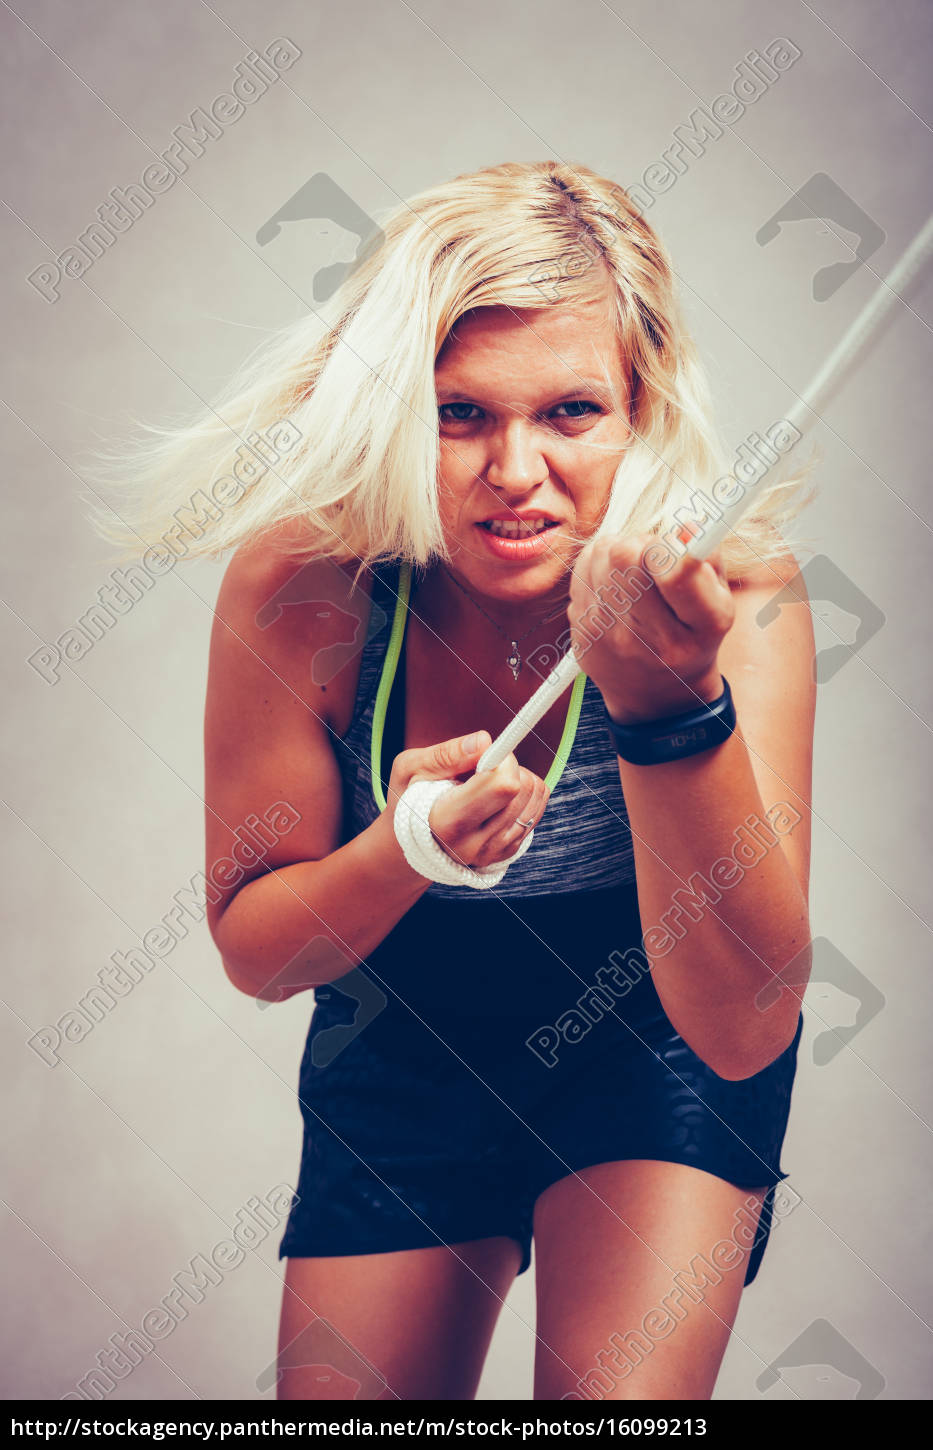 Strong sporty woman pulling rope - Stock Photo #16099213